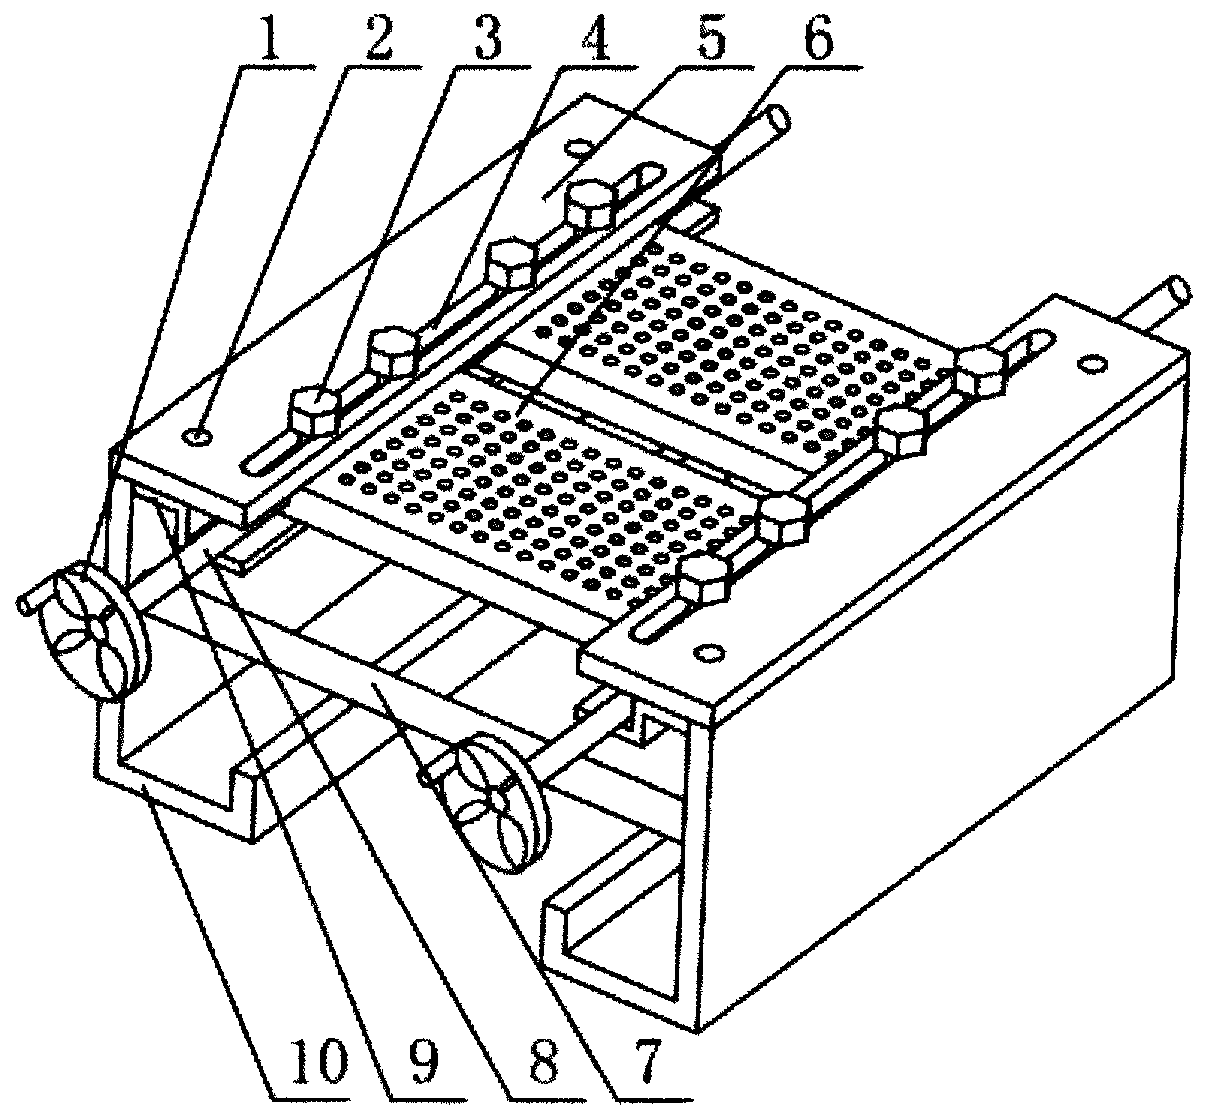 Device for adjusting breadth of weaving machine comber boards